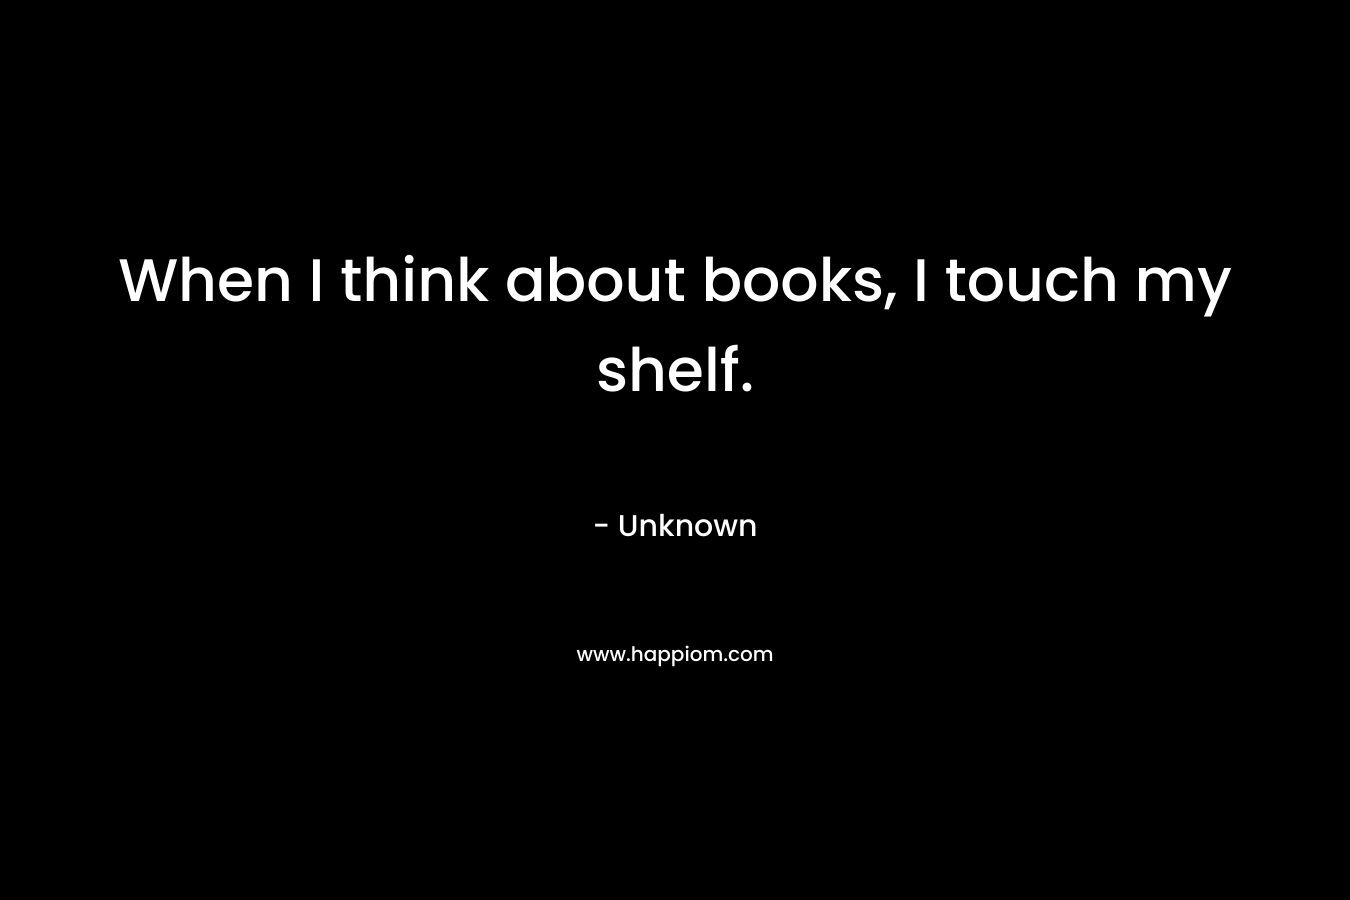 When I think about books, I touch my shelf.